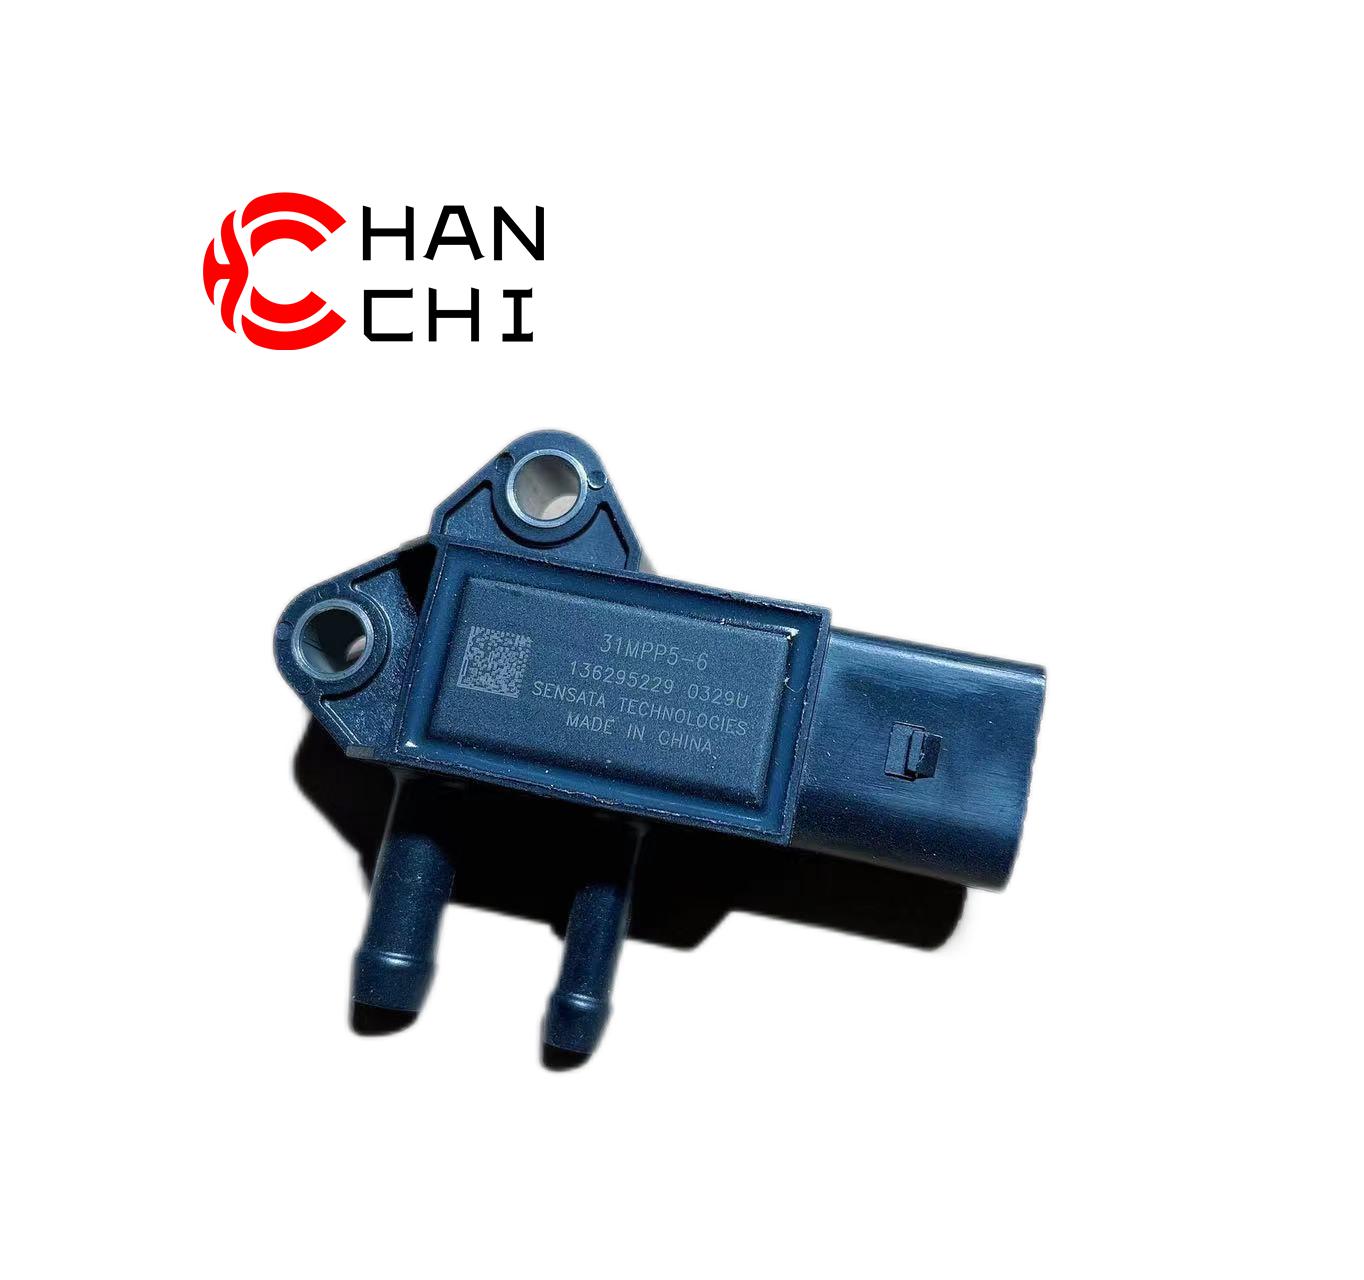 OEM: 31MPP5-6 136295229Material: ABSColor: blackOrigin: Made in ChinaWeight: 100gPacking List: 1* Diesel Particulate Filter Differential Pressure Sensor More ServiceWe can provide OEM Manufacturing serviceWe can Be your one-step solution for Auto PartsWe can provide technical scheme for you Feel Free to Contact Us, We will get back to you as soon as possible.